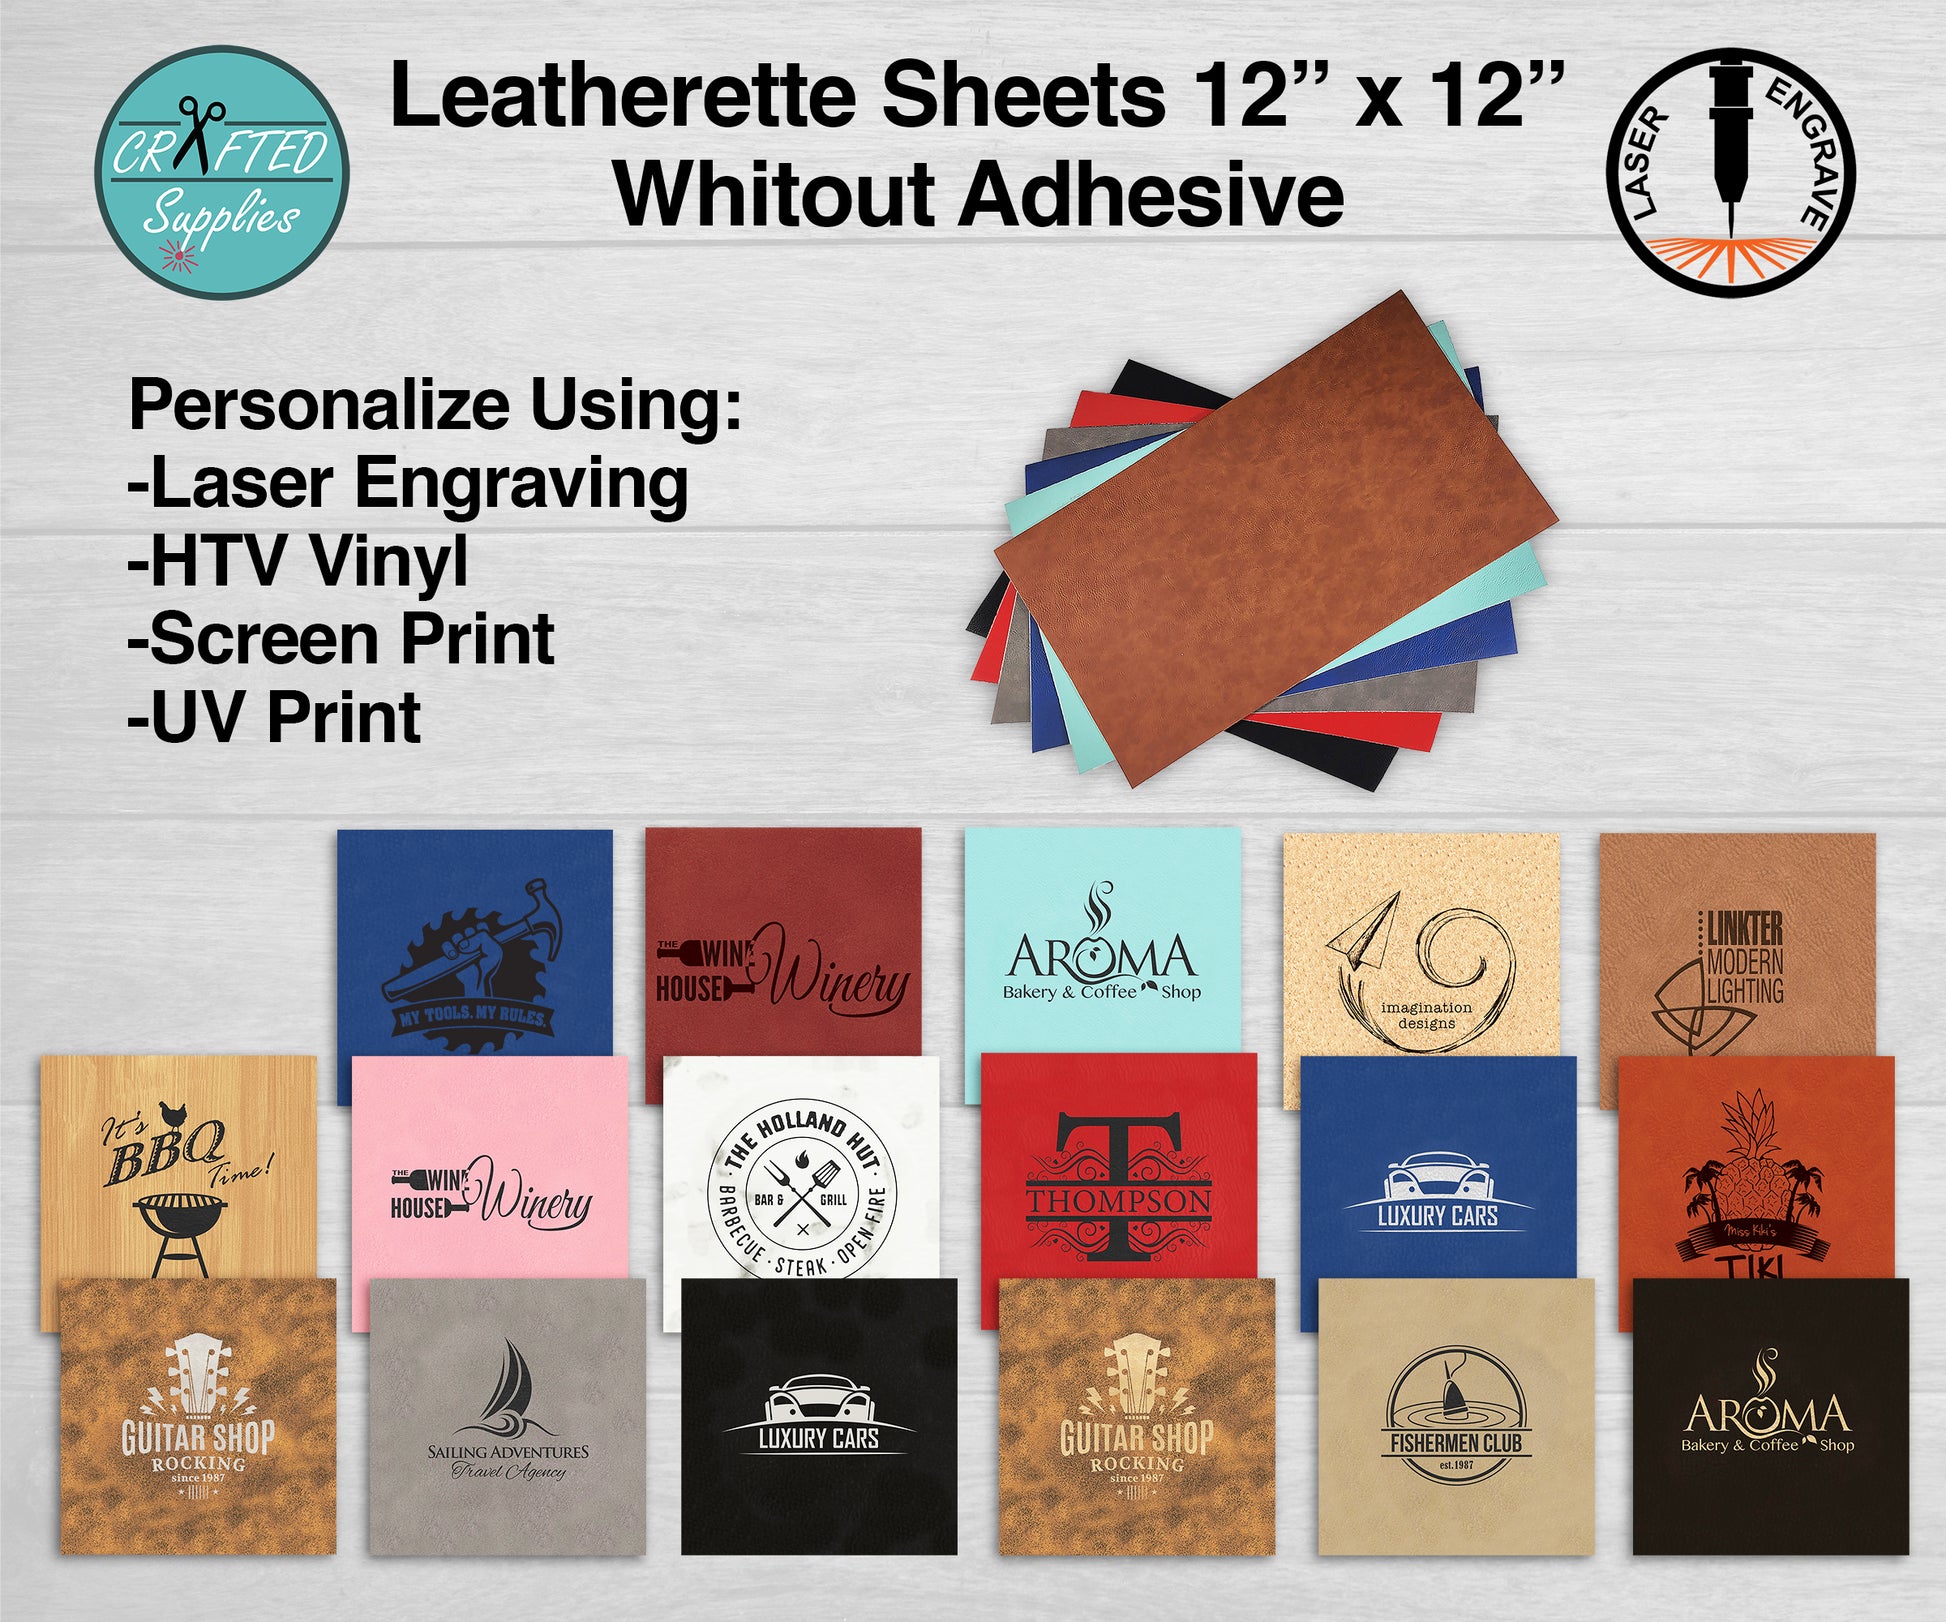 laserable leatherett sheet by crafted supplies without adhesive